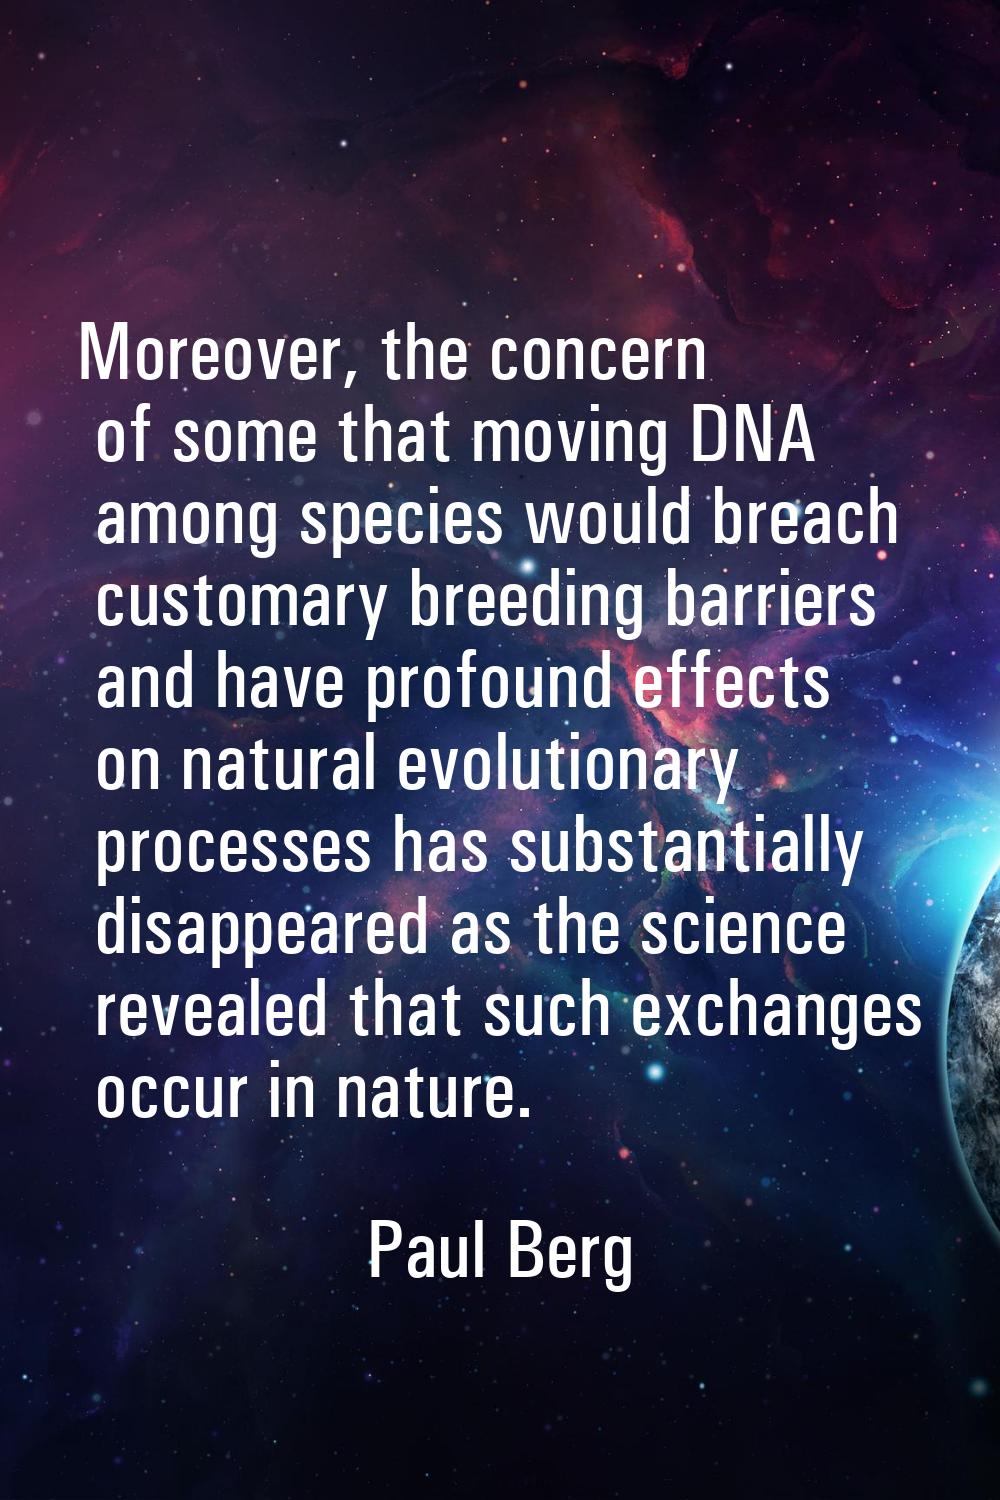 Moreover, the concern of some that moving DNA among species would breach customary breeding barrier